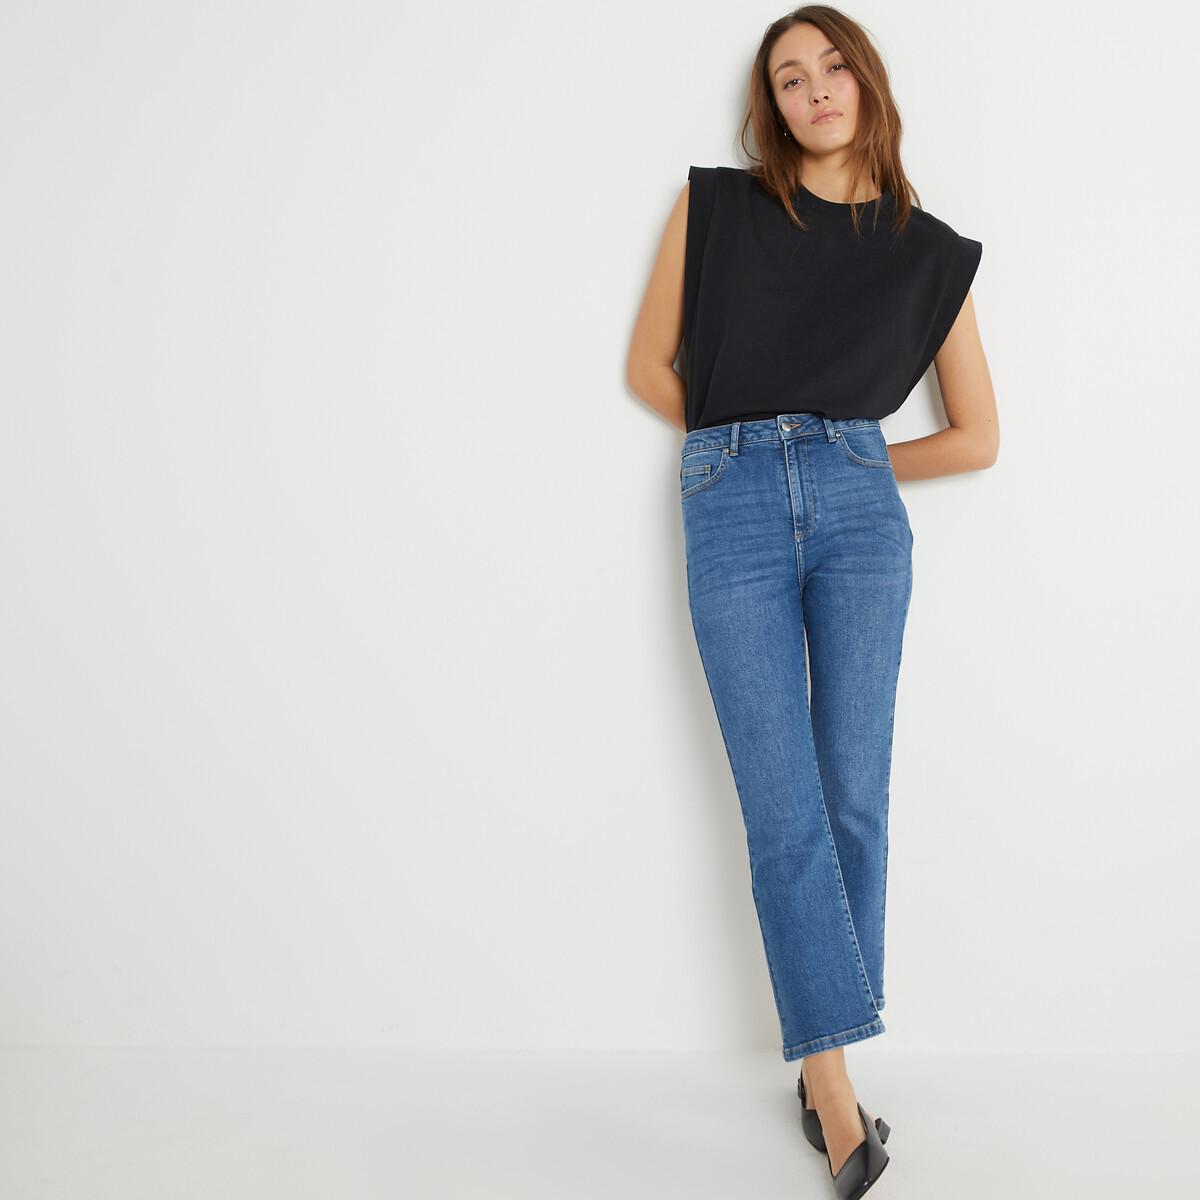 La Redoute Collections  Cropped Flare Jeans mit hoher Taille 